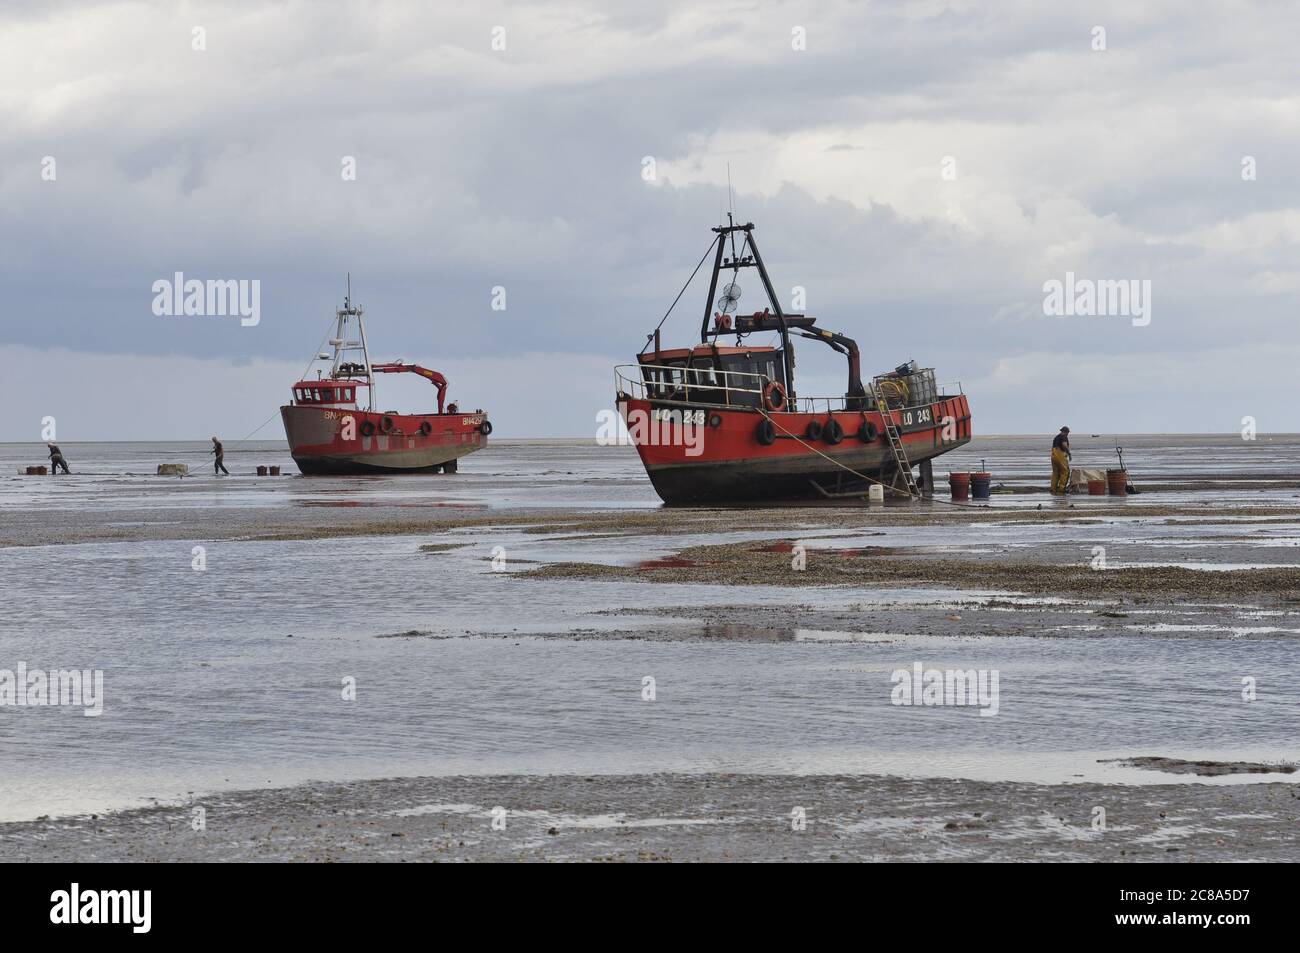 Commercial fishing boats from Boston and and King's Lynn hand-raking cockles in The Wash, a large inlet on England's east coast. Stock Photo